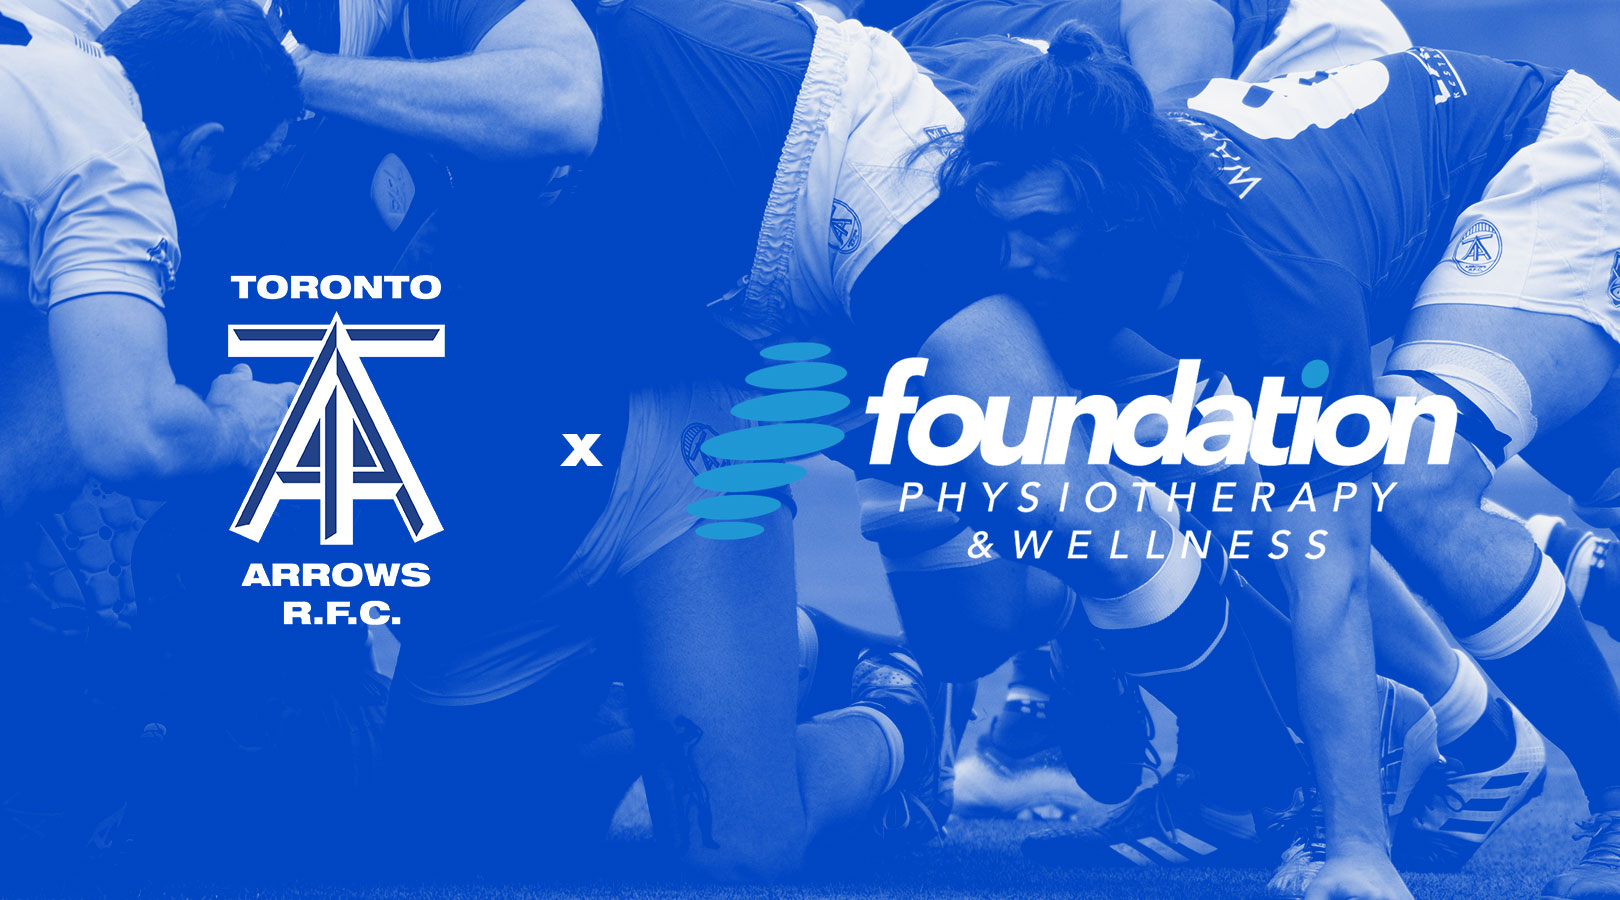 Toronto Arrows Announce Foundation Physio as Official Club Physiotherapy Partner